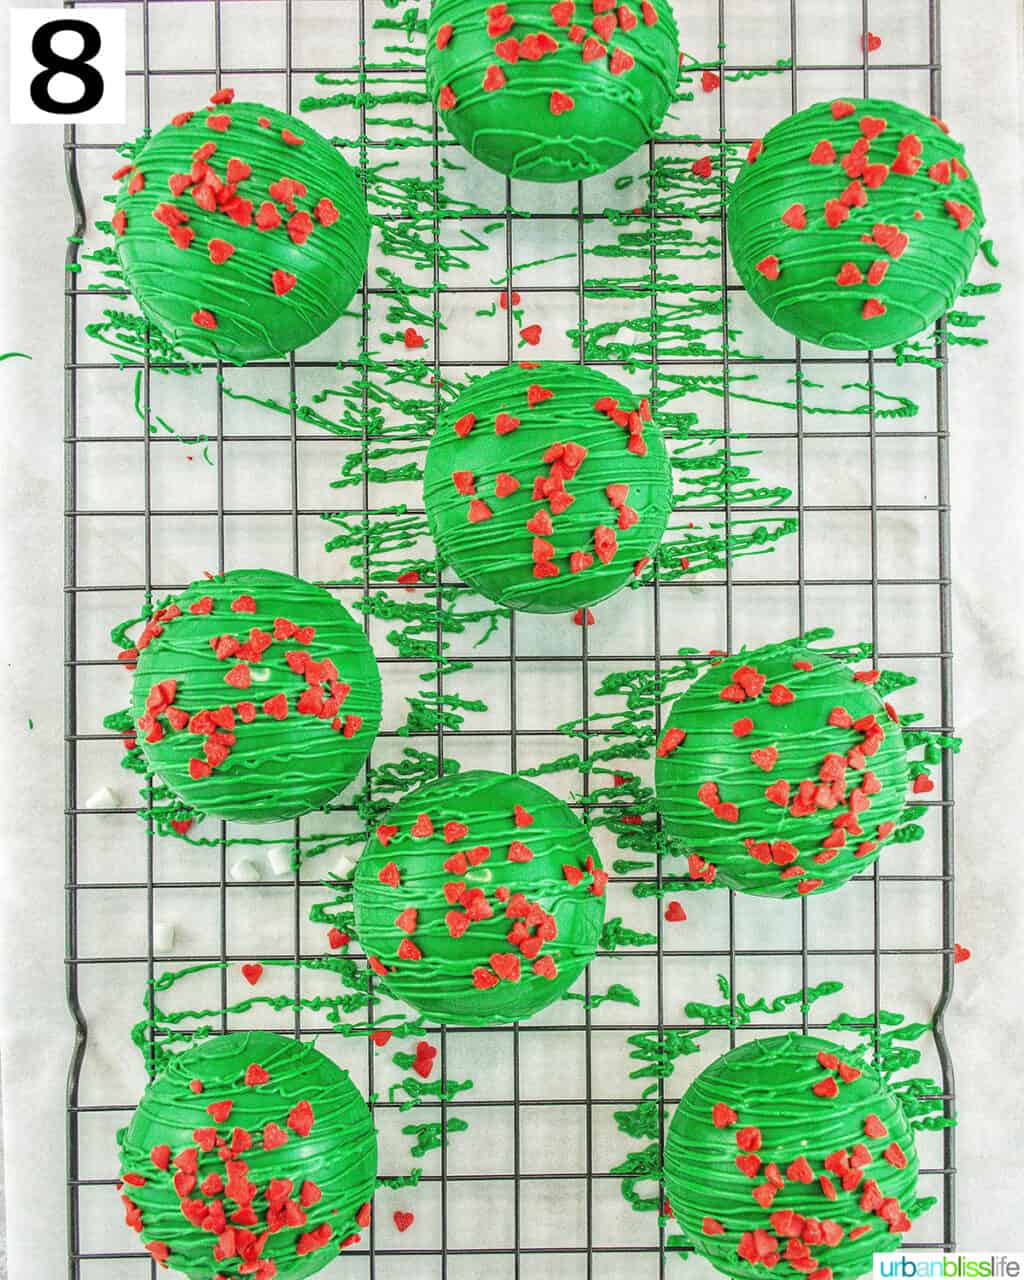 green halves of Grinch hot cocoa bombs with frosting, marshmallows, hot cocoa mix, and red heart sprinkles.